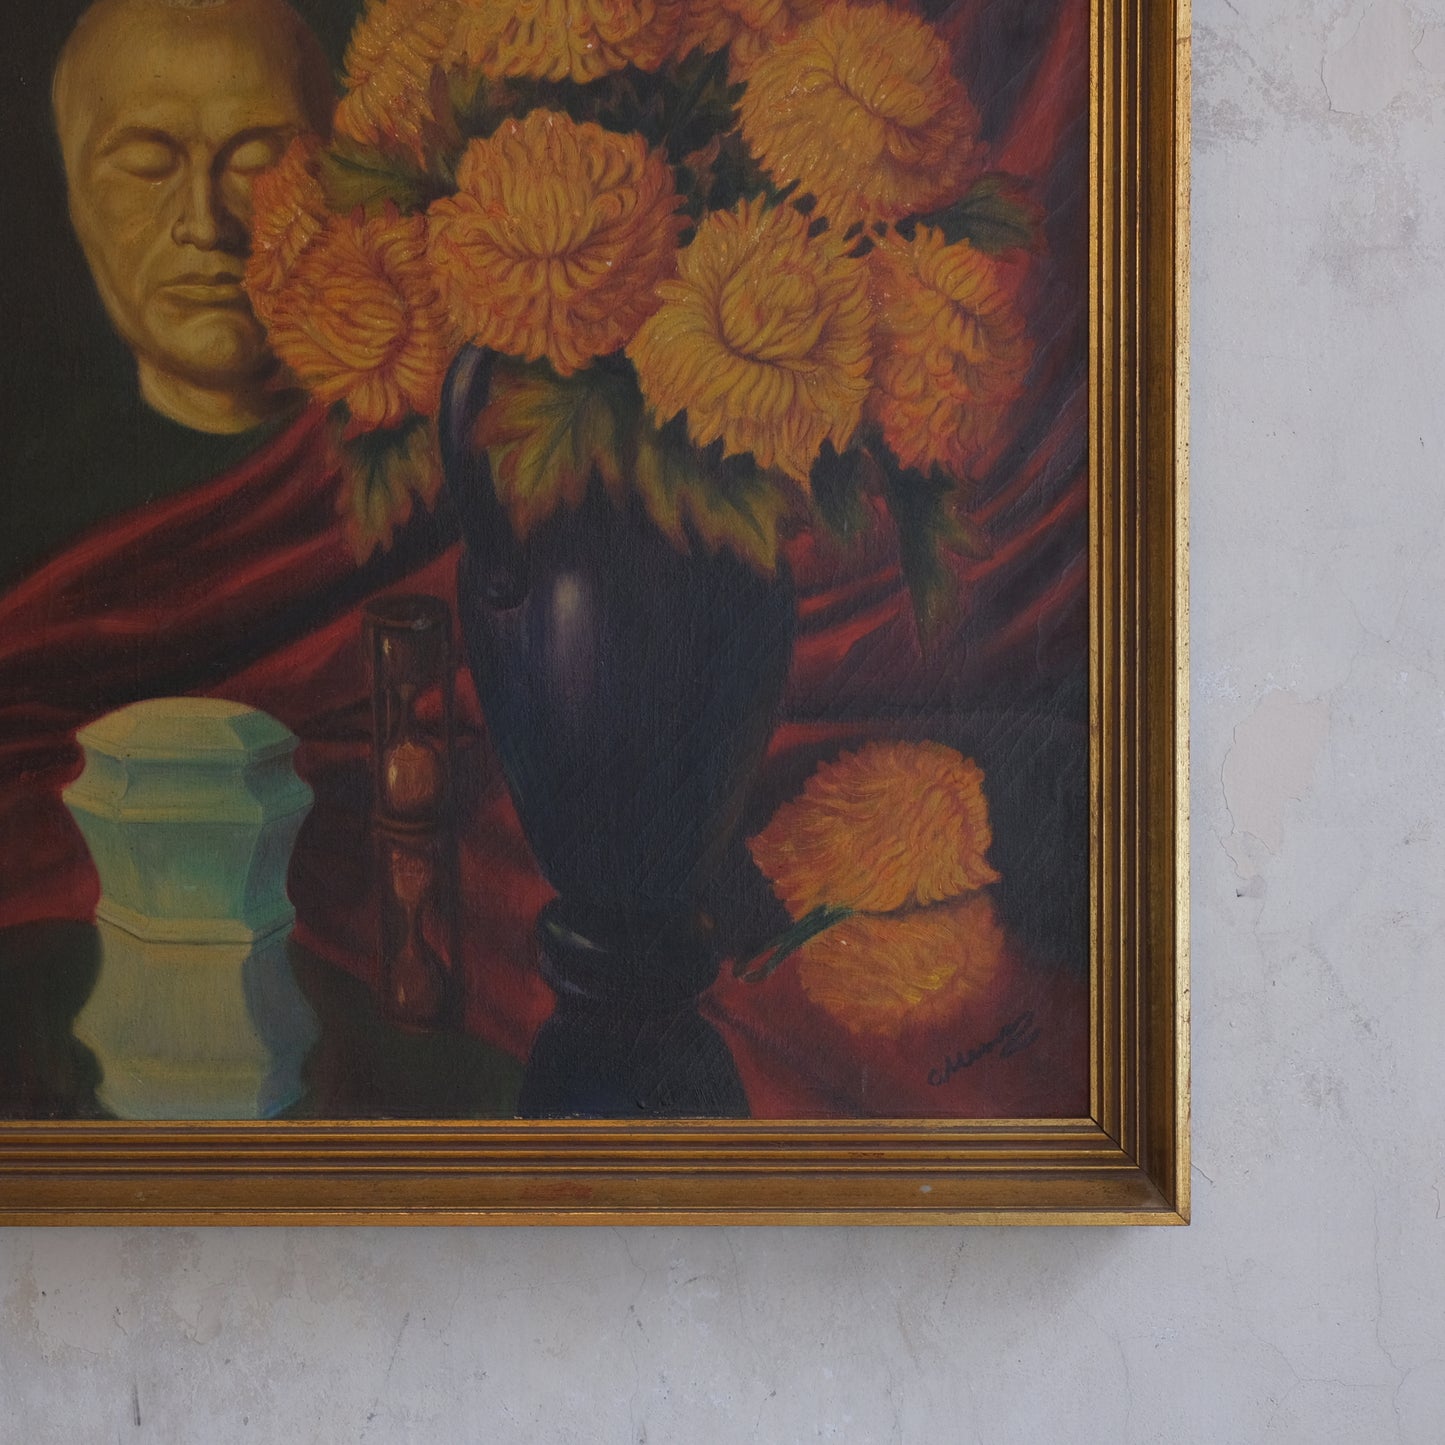 Death Mask & Floral Still Life Painting